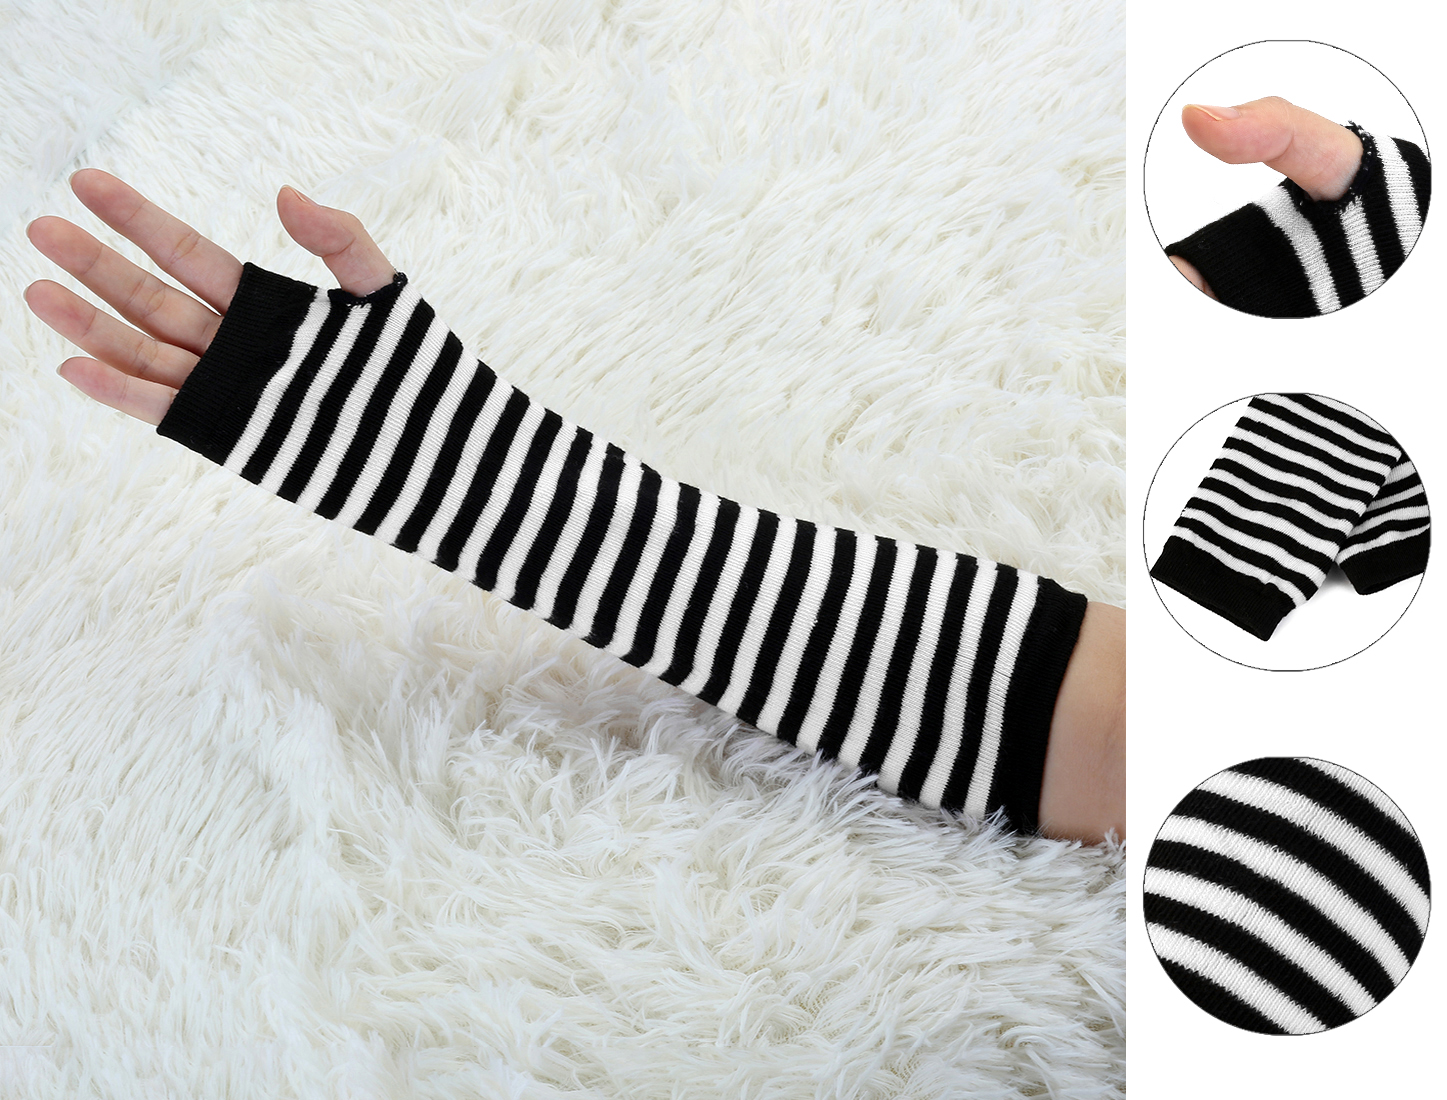 Nylon White Fingerless Arm Sleeves, Size: Free at Rs 45/pair in